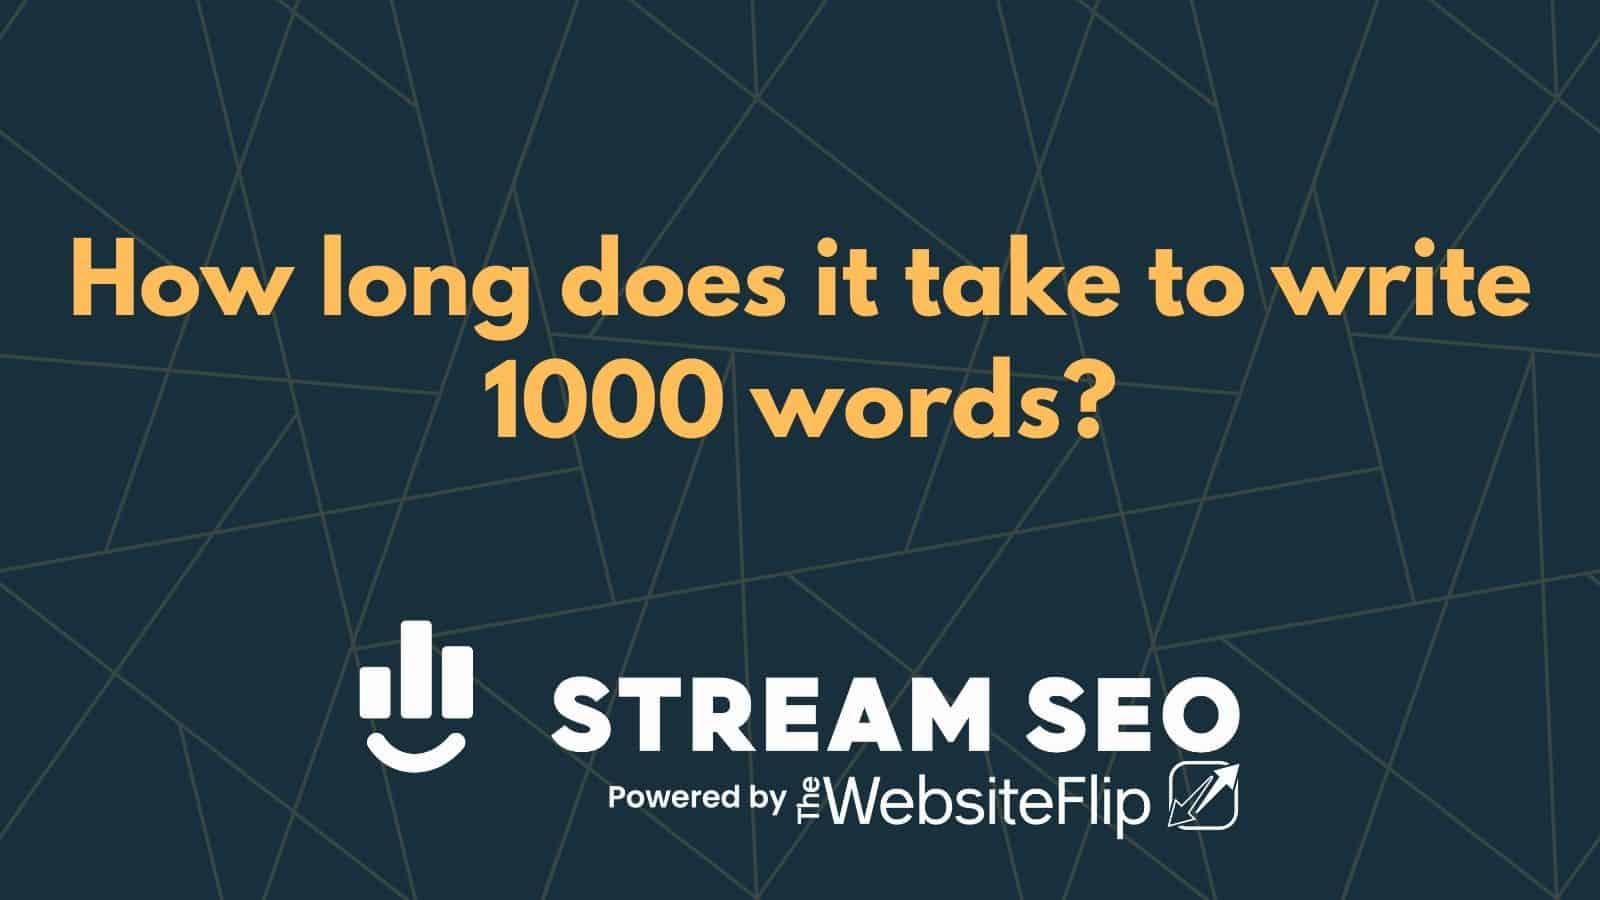 How long does it take to write 1000 words?